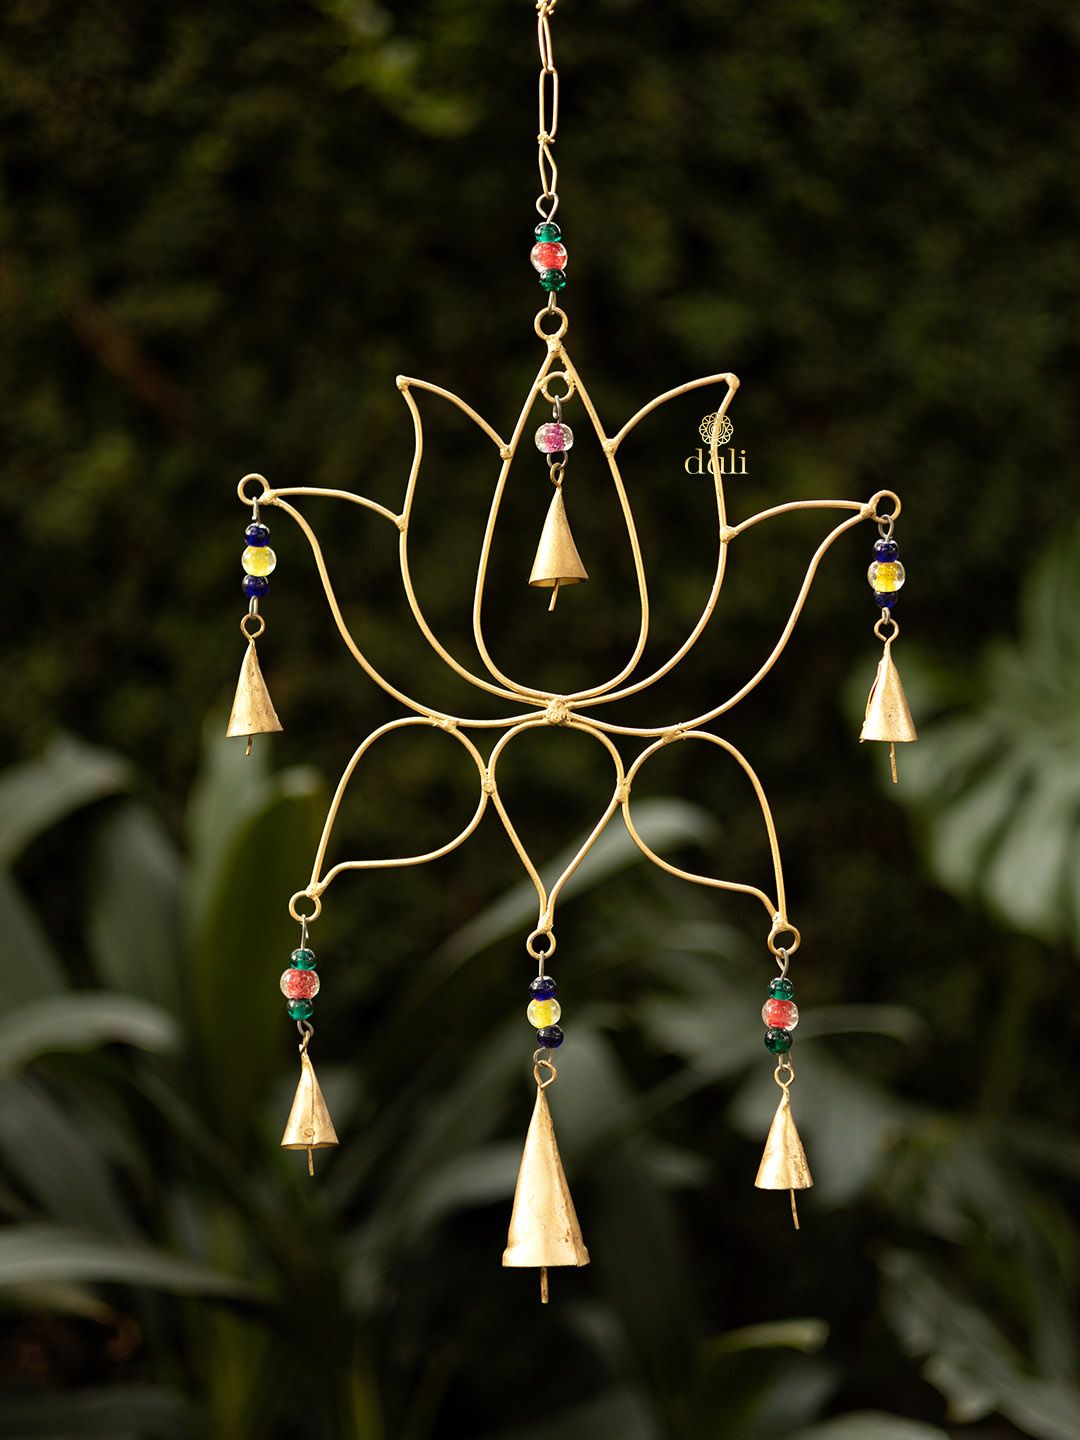 DULI Gold-Toned & Blue Lotus Design Windchime With Hanging Bells Price in India